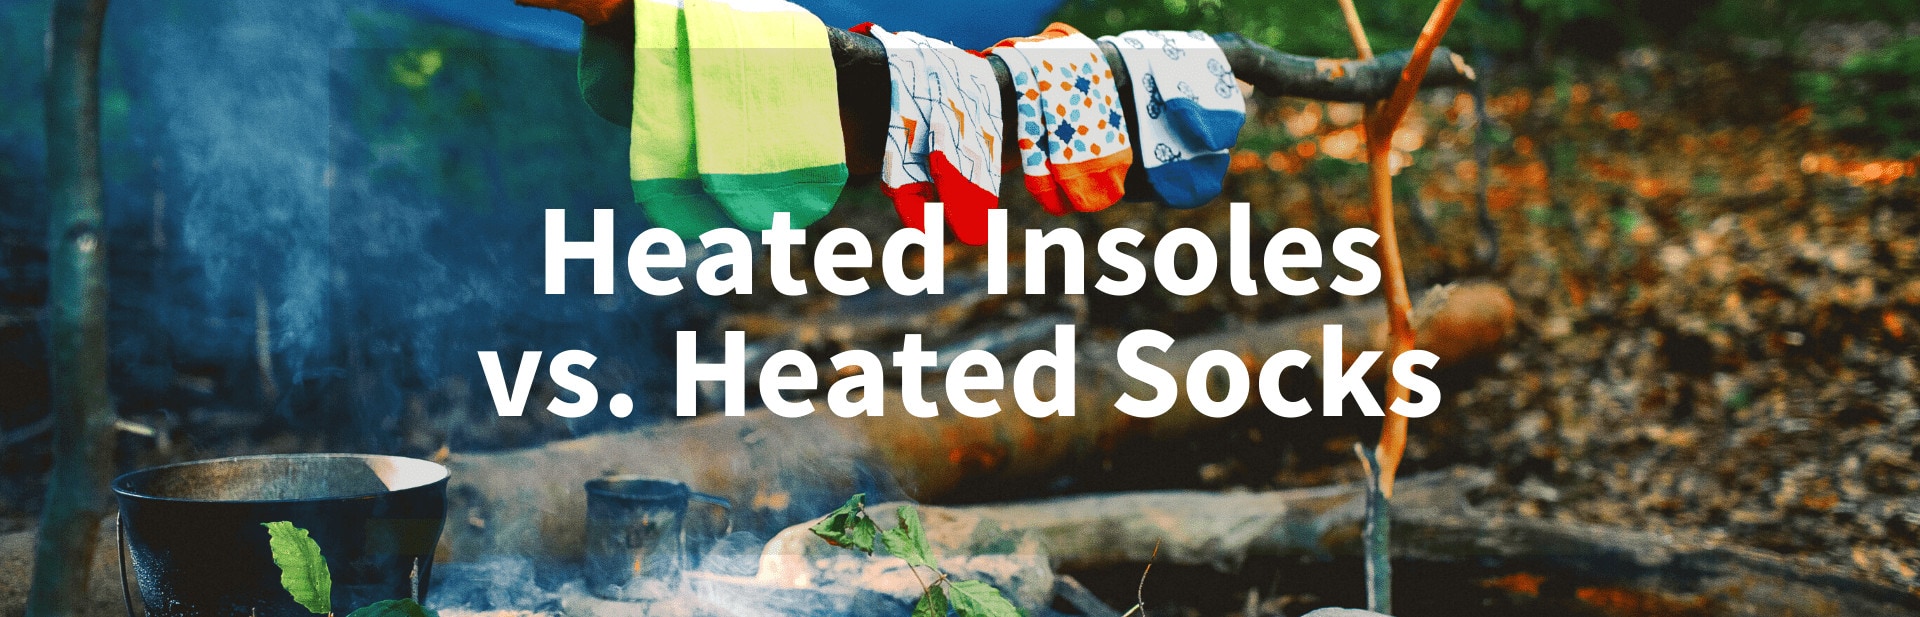 Heated Insoles vs Heated Socks: Which Option Is Right For You?